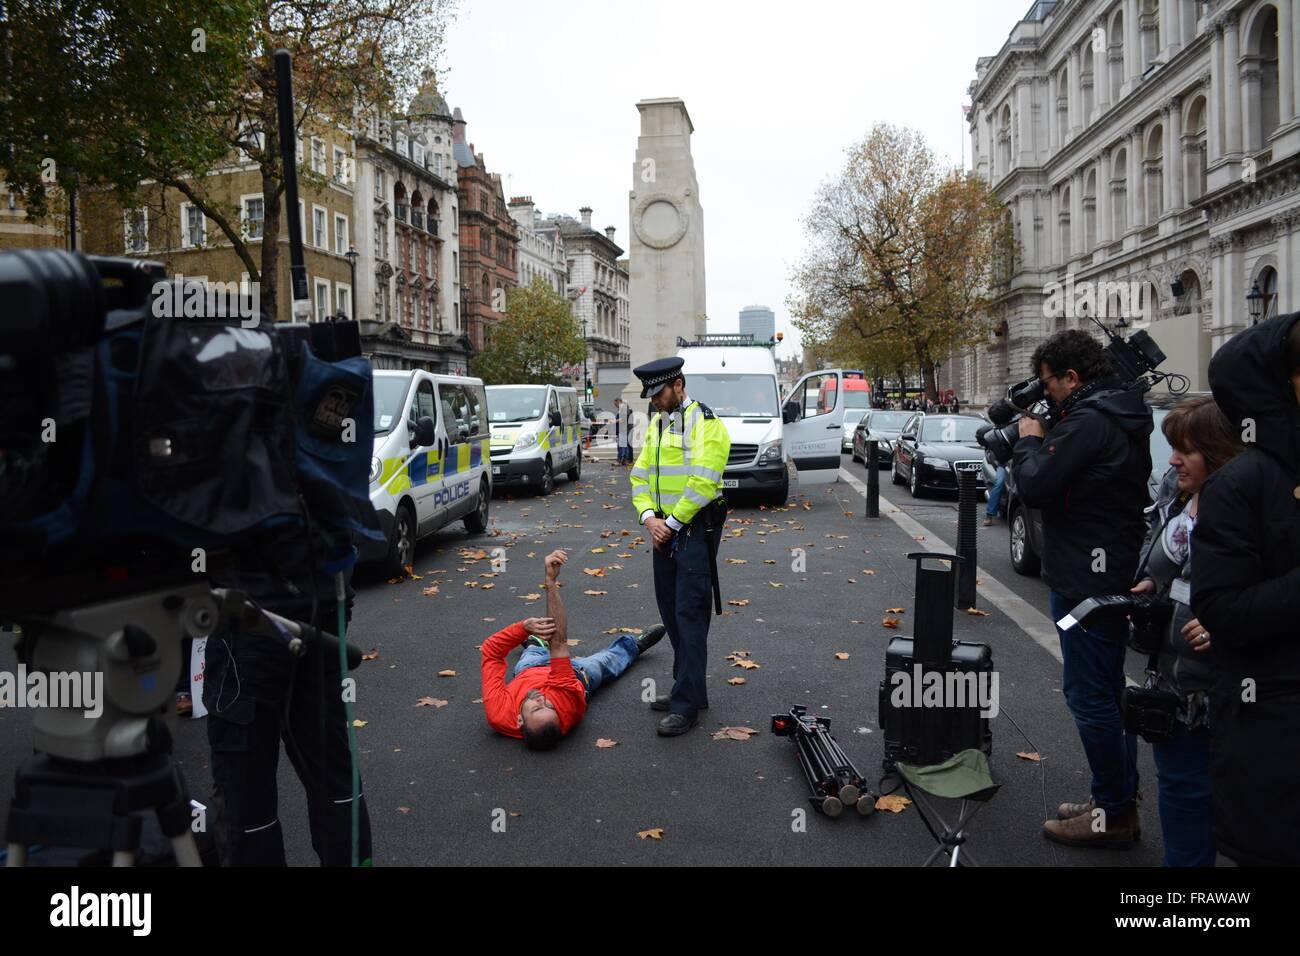 November 5th 2015. London, UK. Police officer talks to a protester staging a 'die-in' protest. ©Marc Ward/Alamy Stock Photo